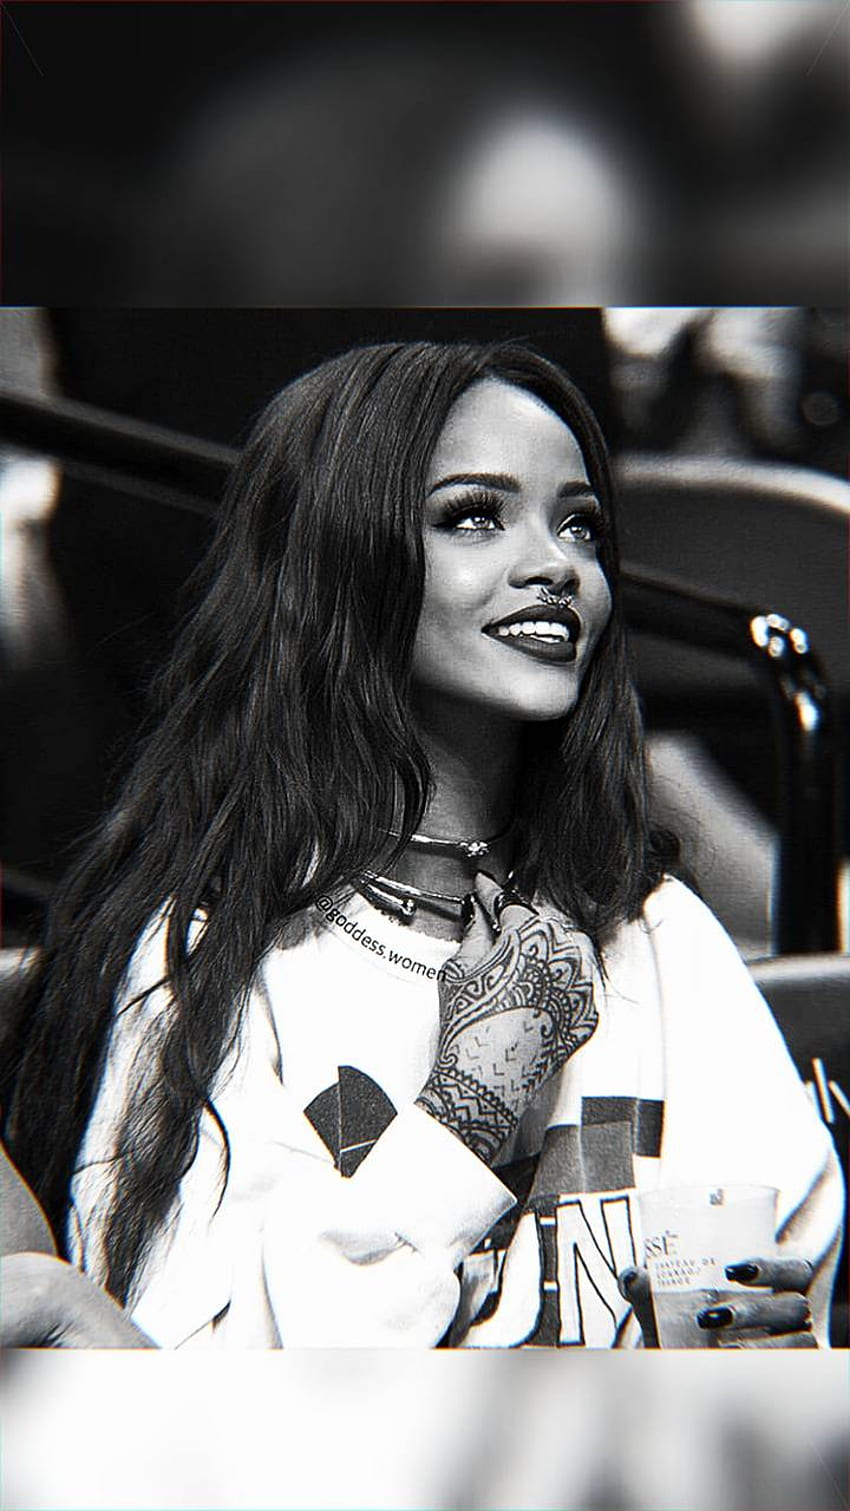 A woman with long hair is smiling - Rihanna